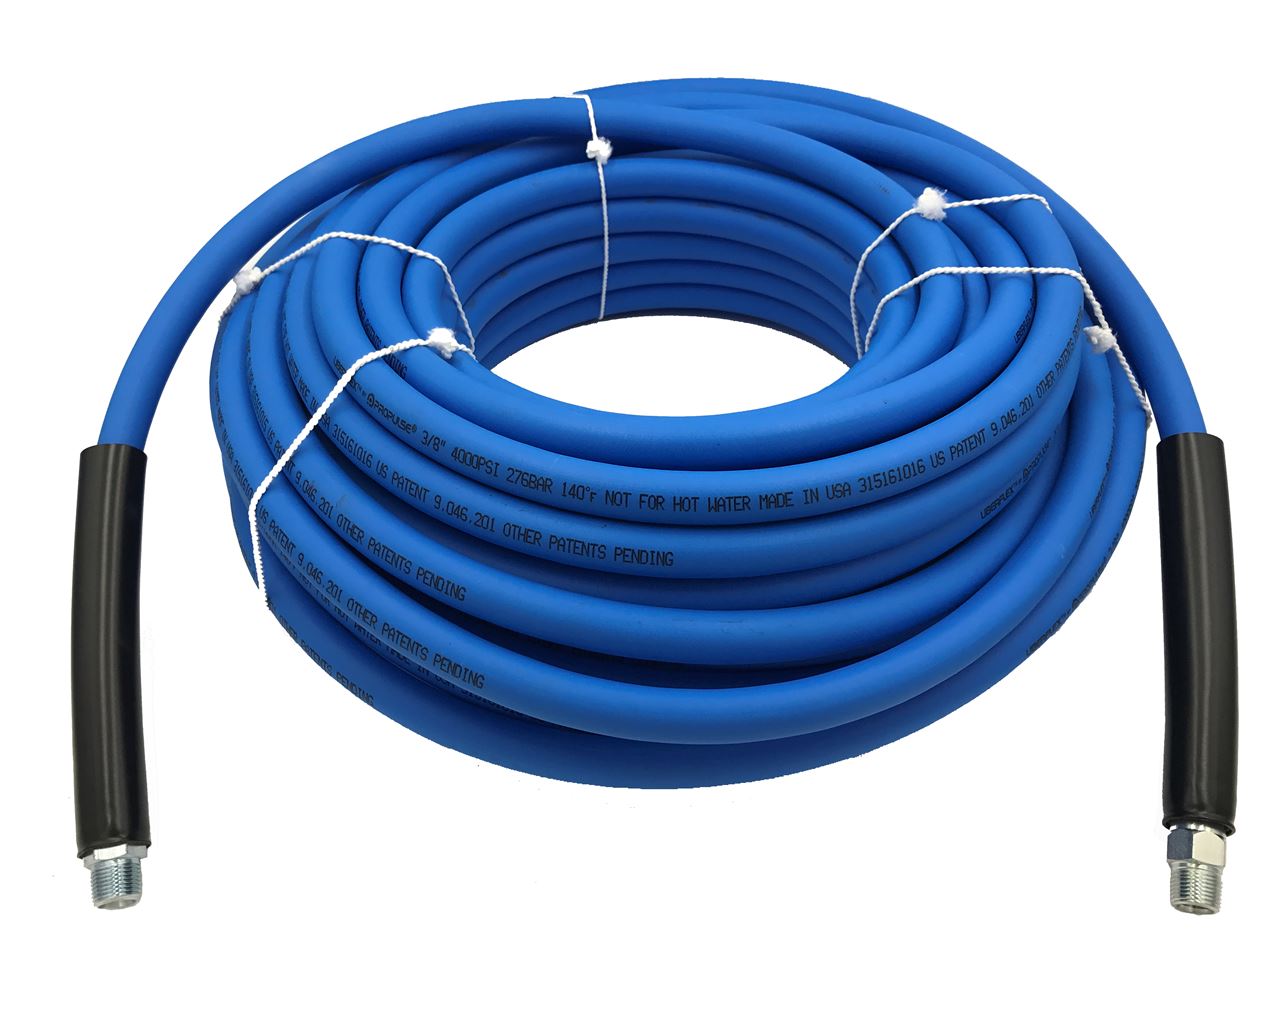 100' Hot Water Pressure Washer Hose 2 Wire 3/8" 4200PSI Industrial Power Washer 